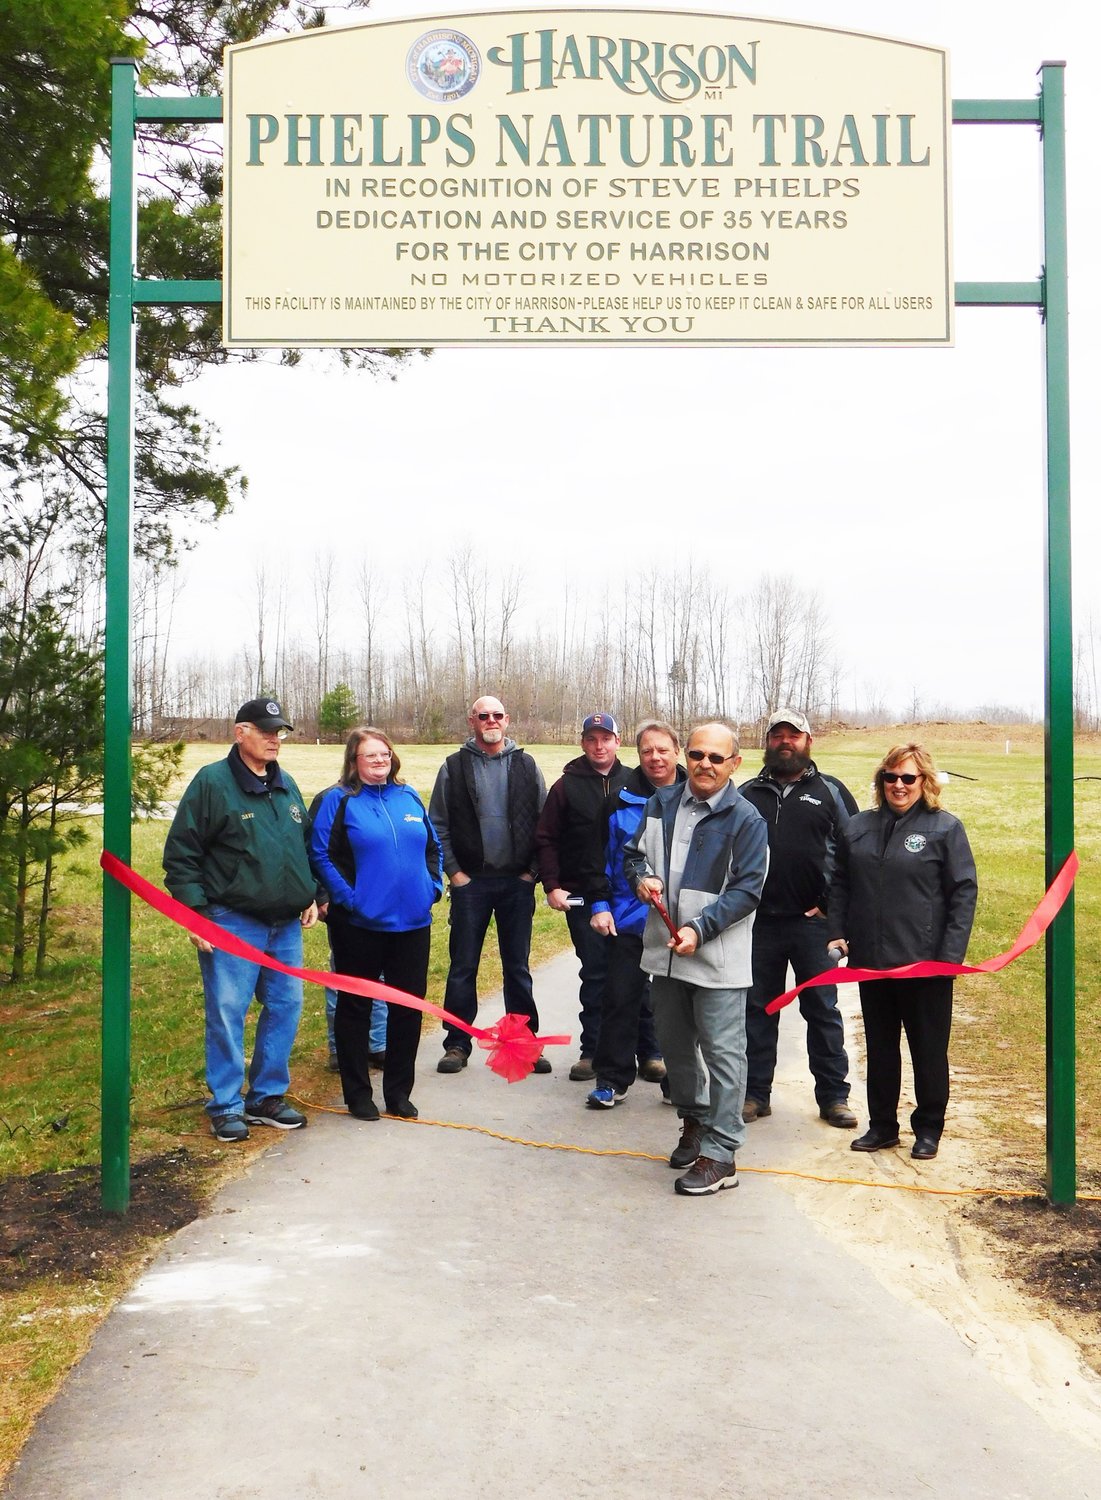 Steve Phelps snips the ribbon, officially opening the nature trail named in his honor. He is flanked, from left, by Council members Dave Rowe and Angela Kellogg, DPW Superintendent Sam Russell, Colton Hilyard, Mayor Pro Tem Dan Sullivan, son Johnny Phelps and retiring Harrison City Manager Tracey Connelly.